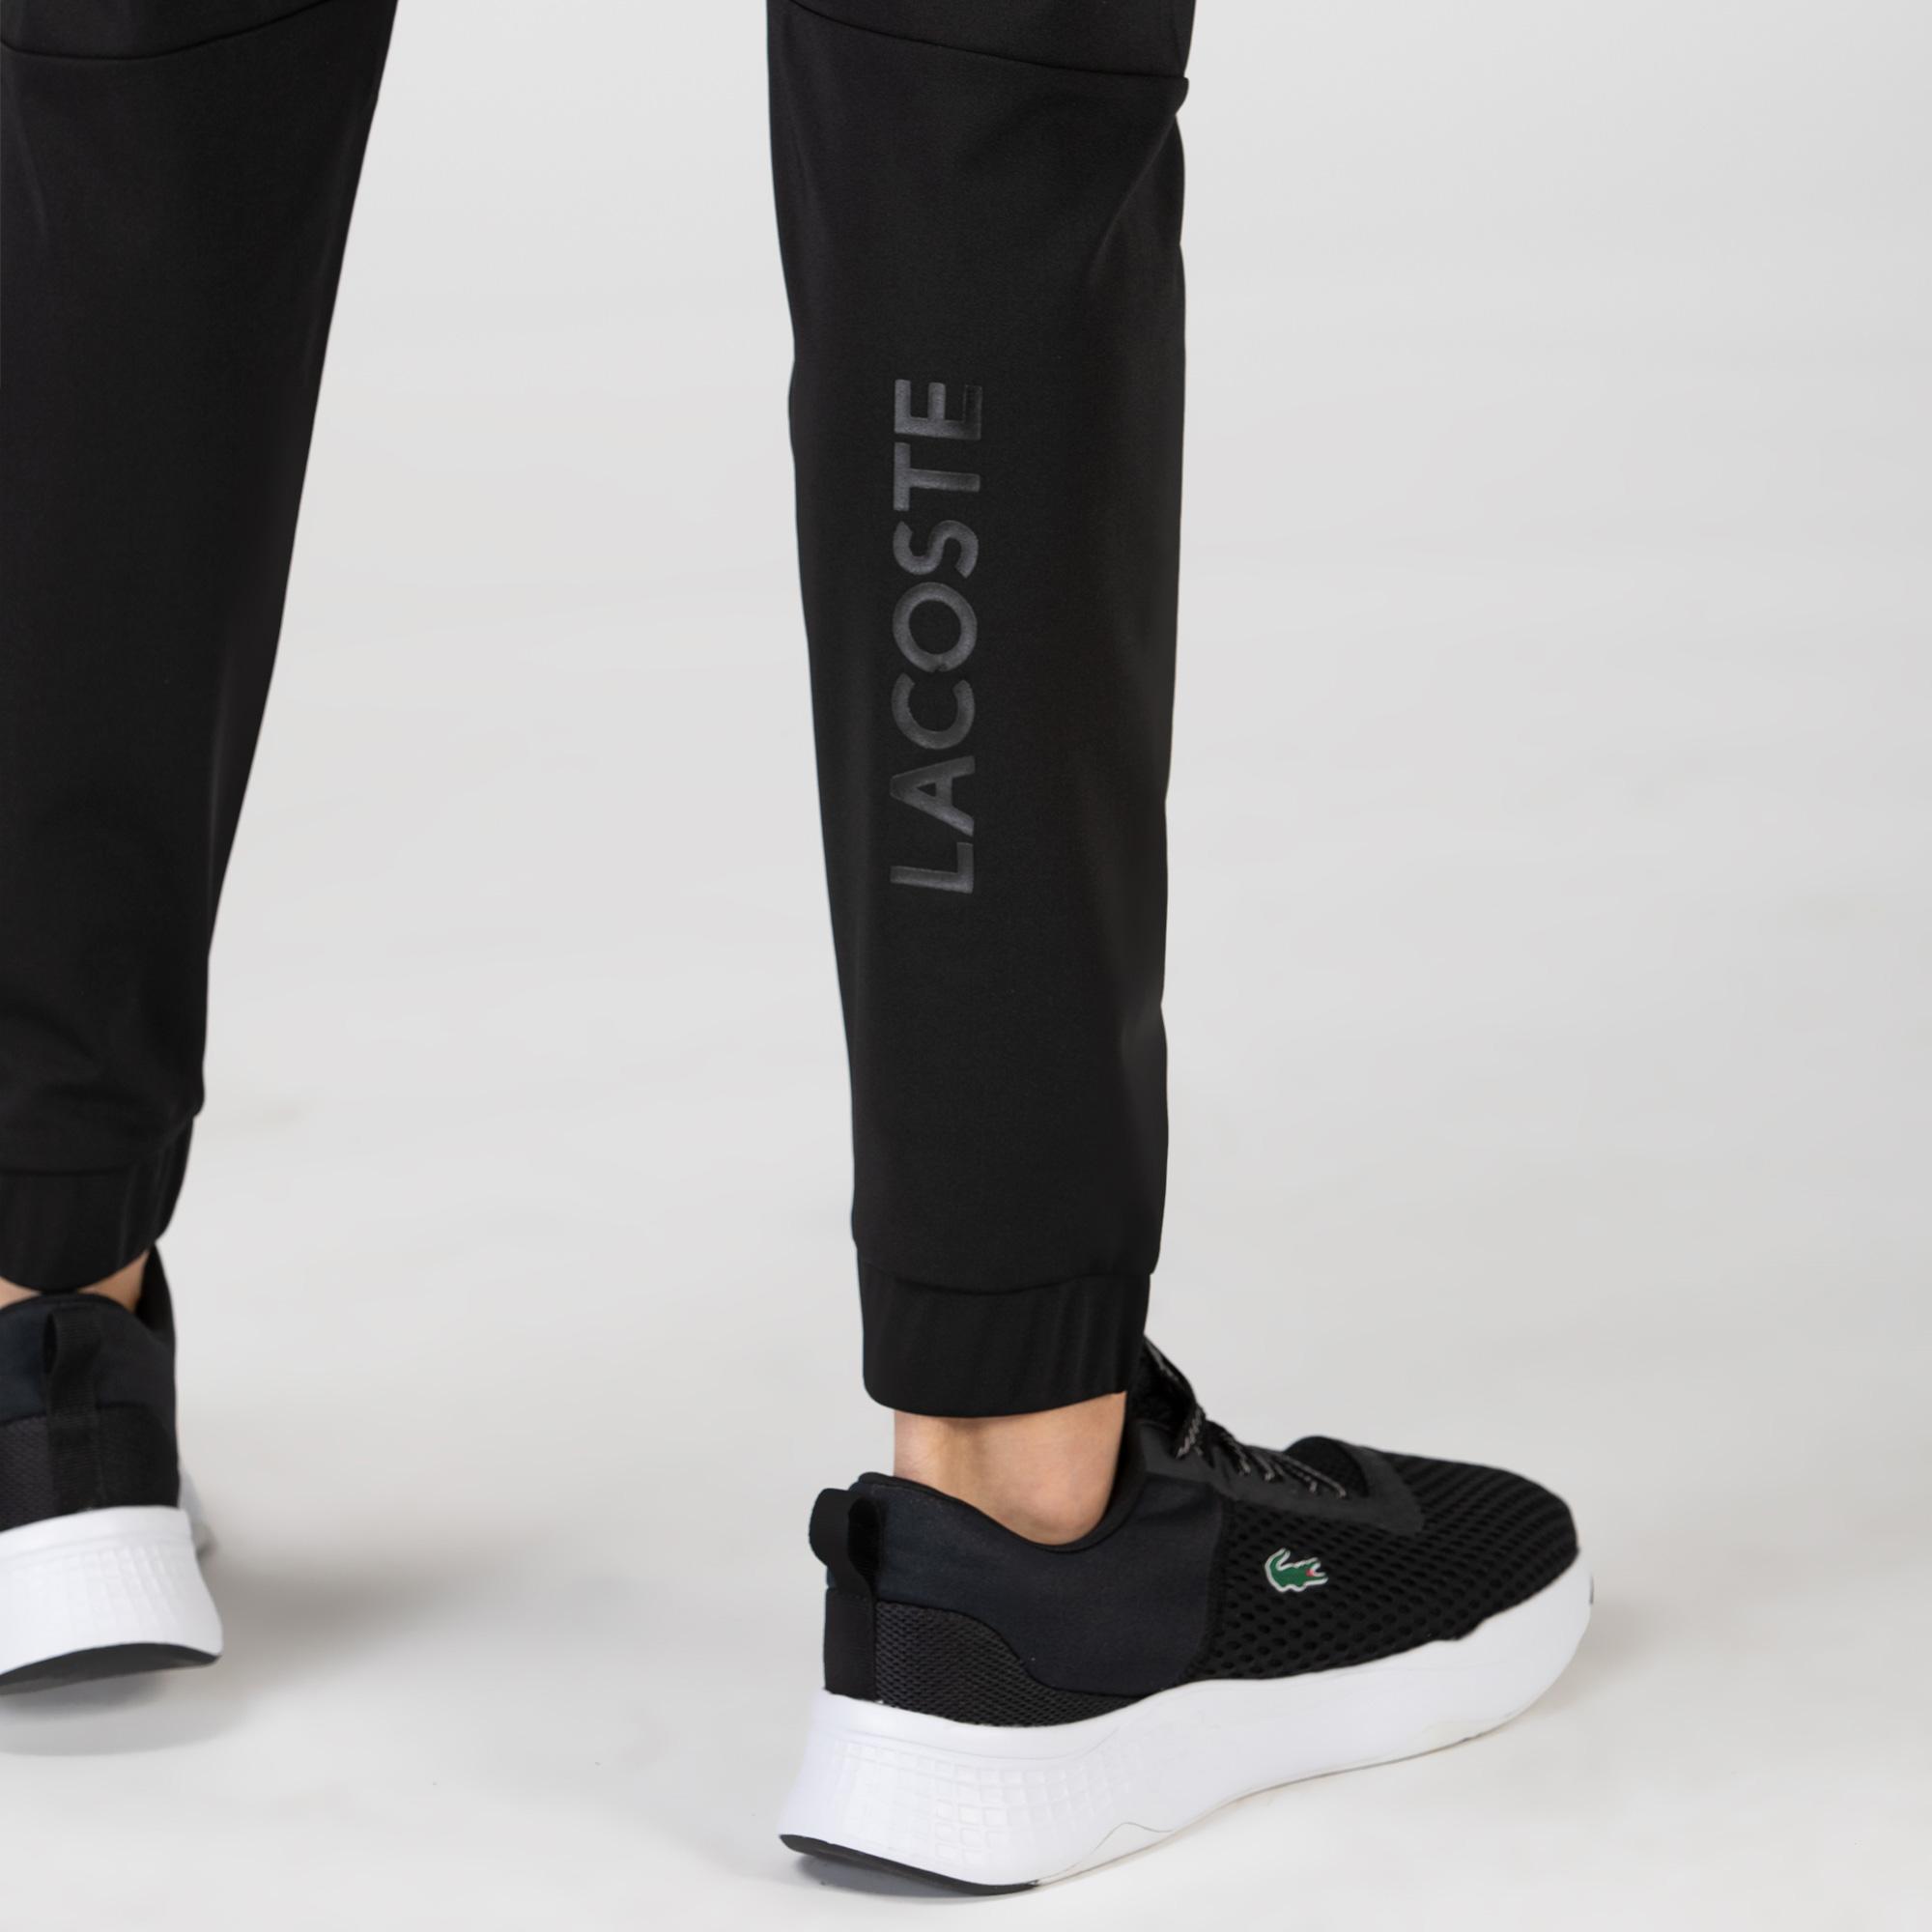 lacoste tracksuit trousers